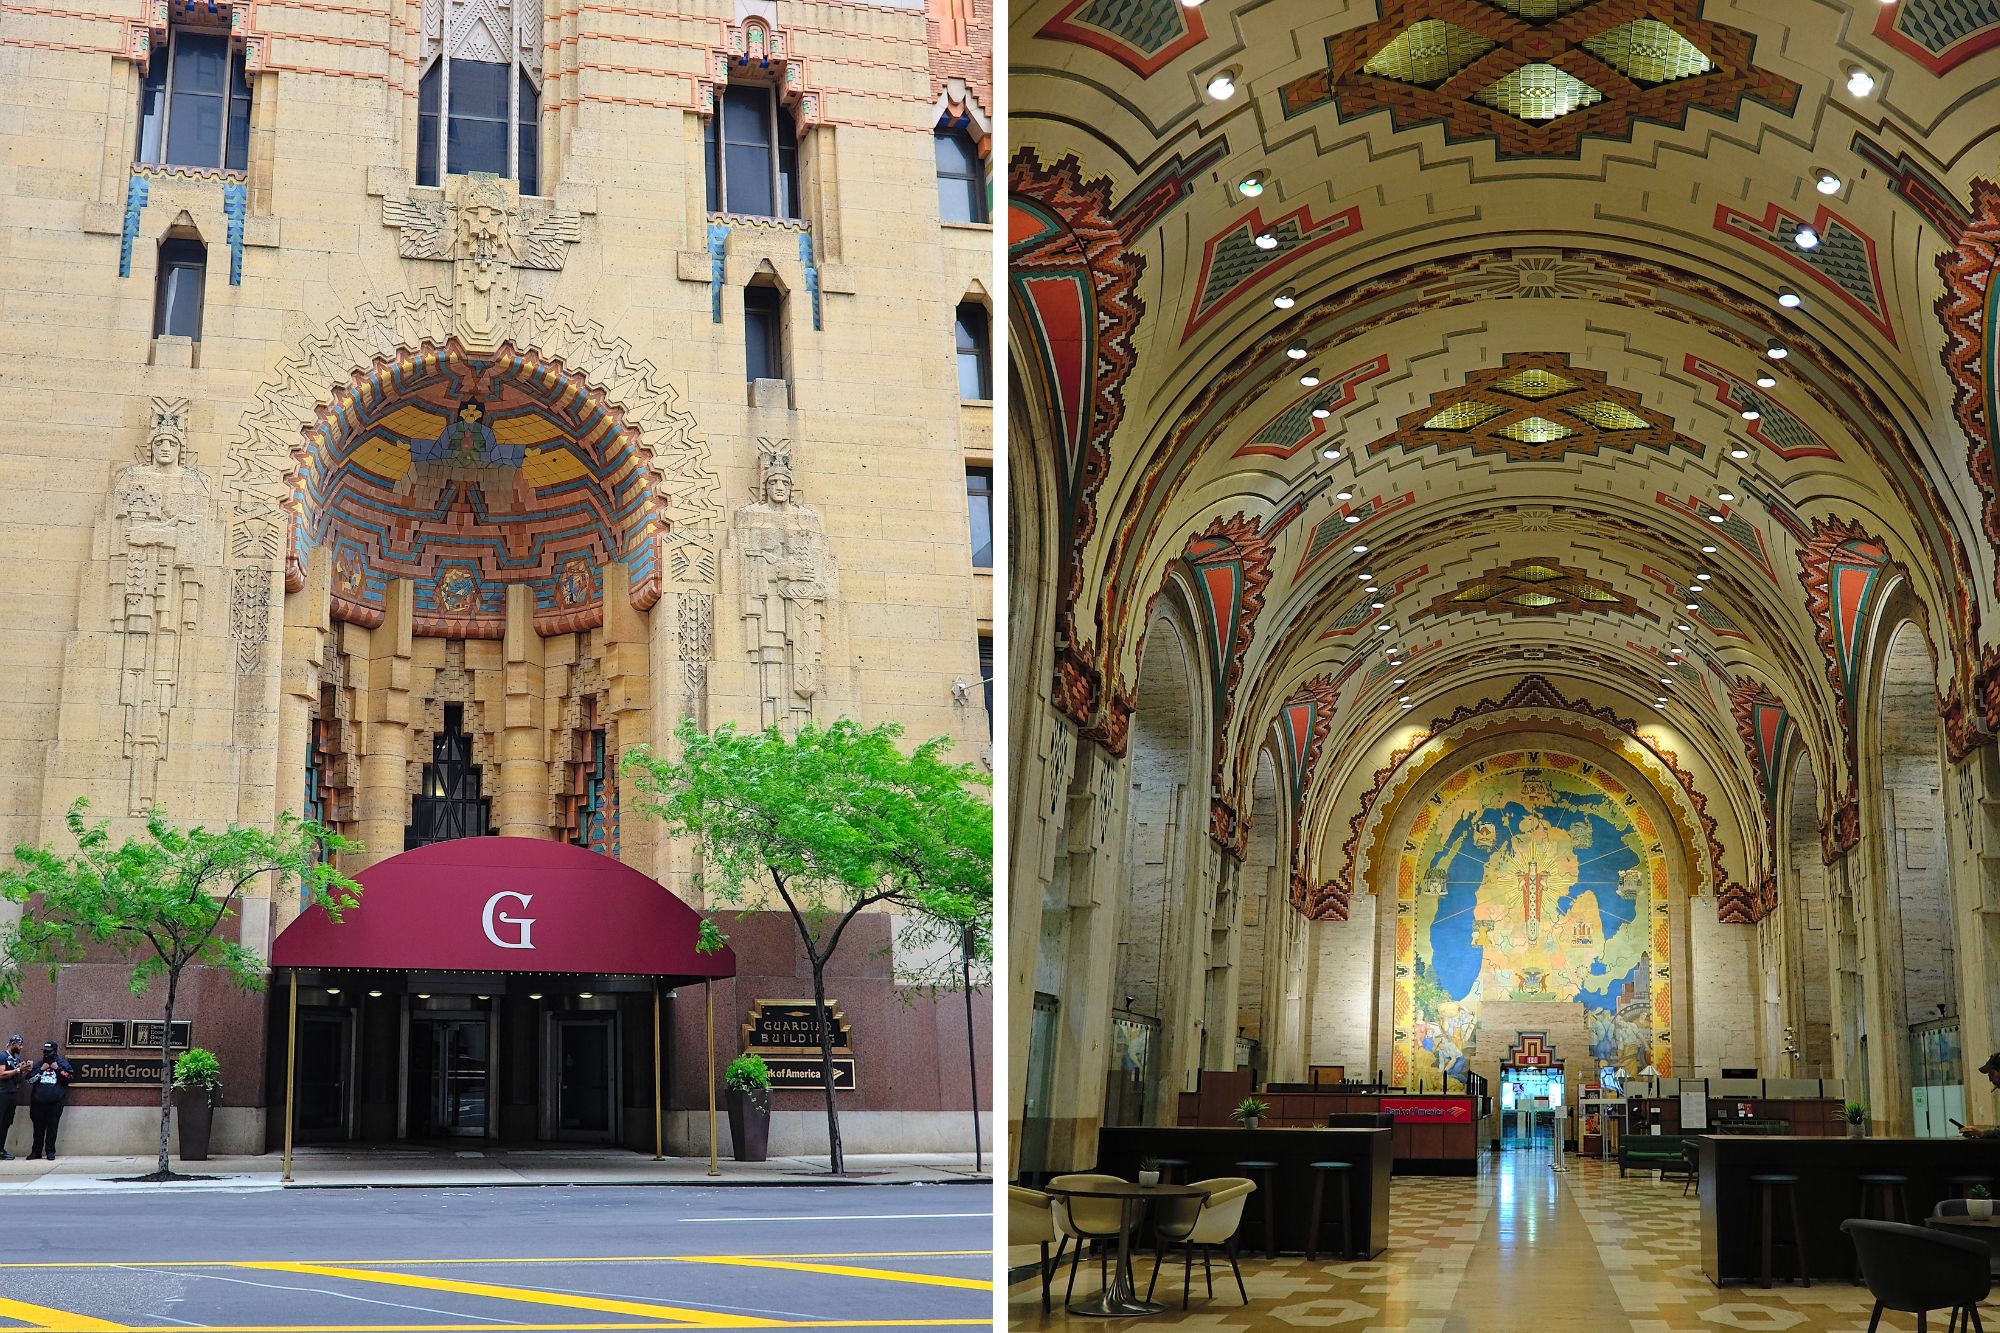 The interior and exterior of the Guardian Building in Detroit